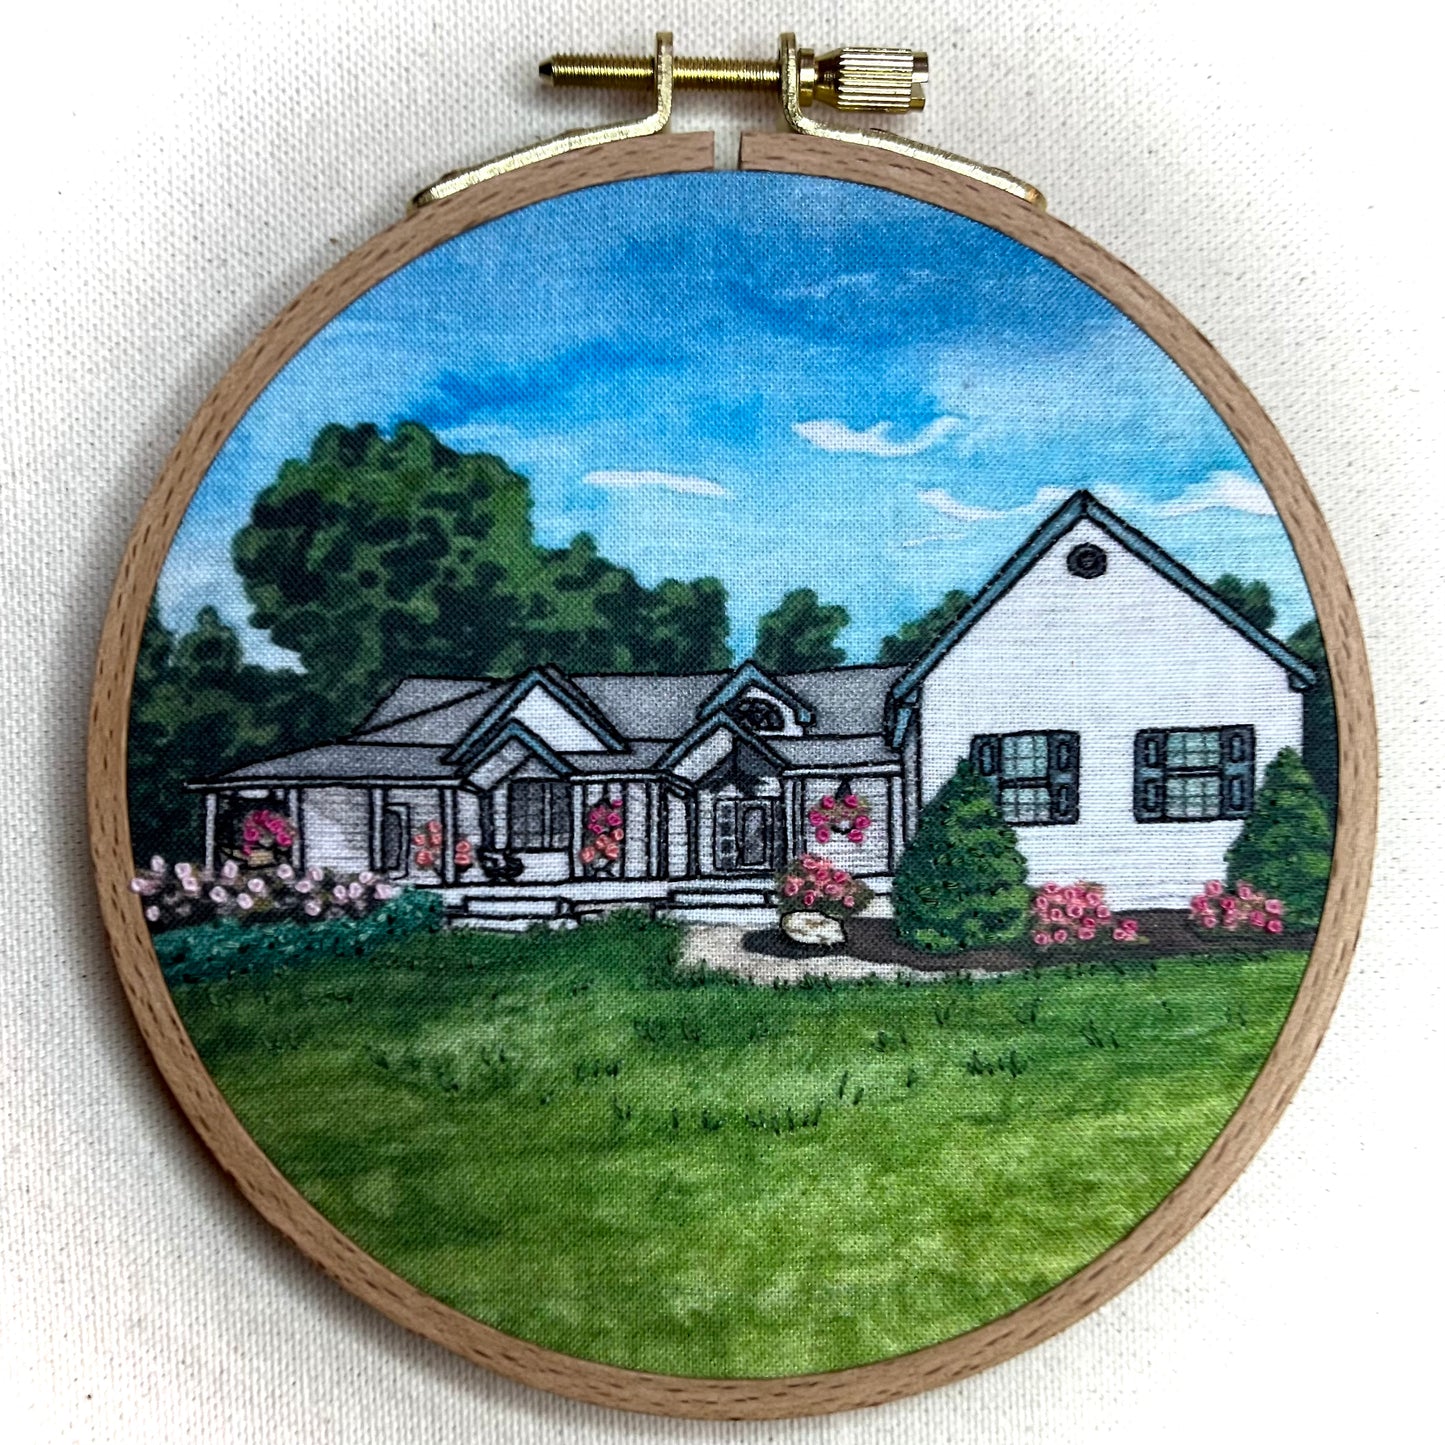 Custom House, Hand-Stitched Watercolor Artwork